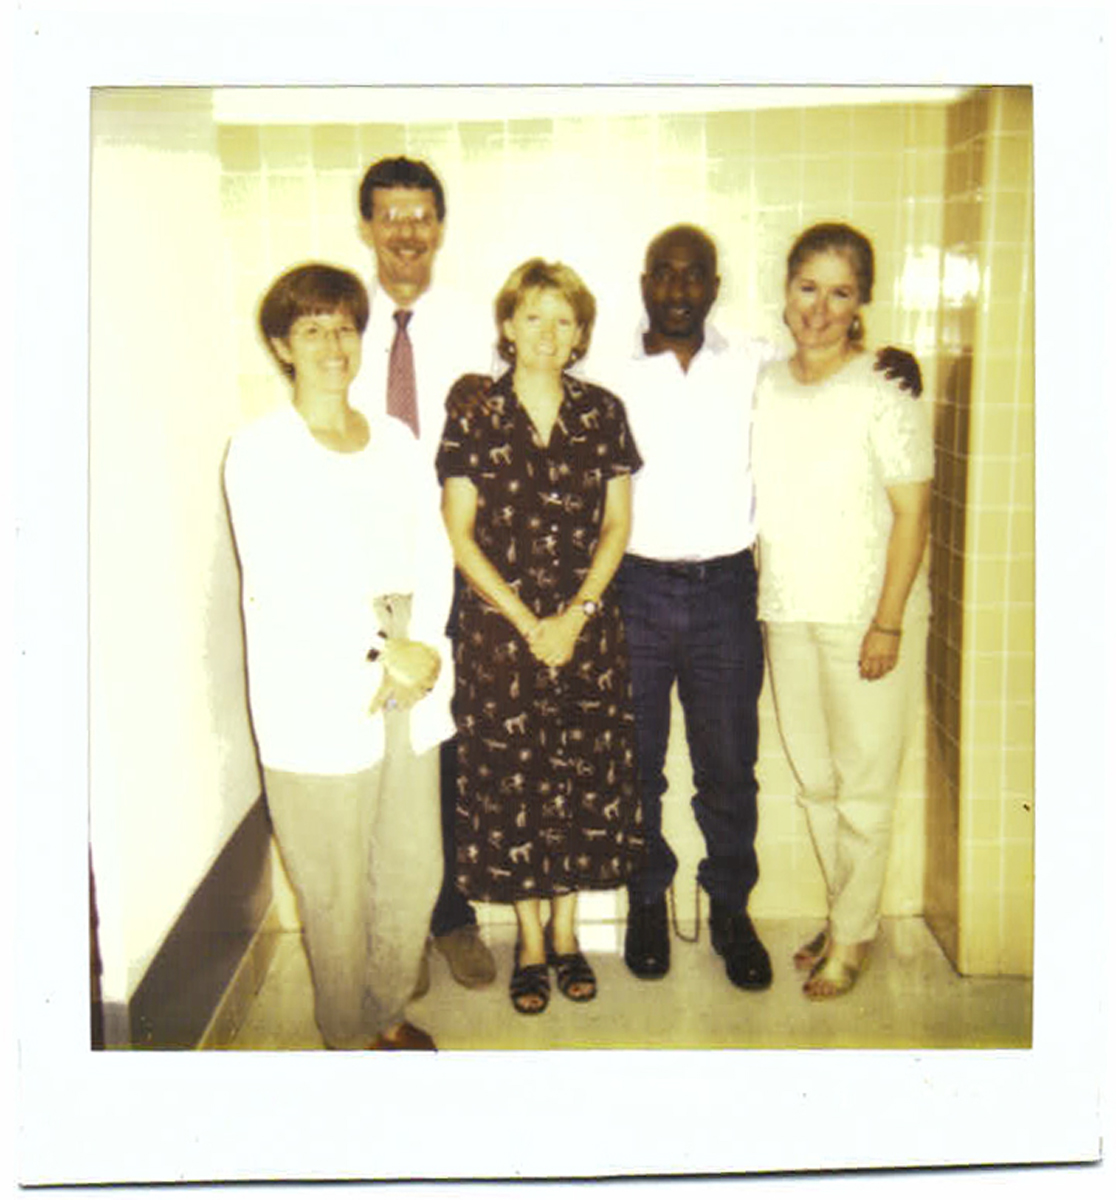 The team that worked with Feltus Taylor while at Angola Prison.